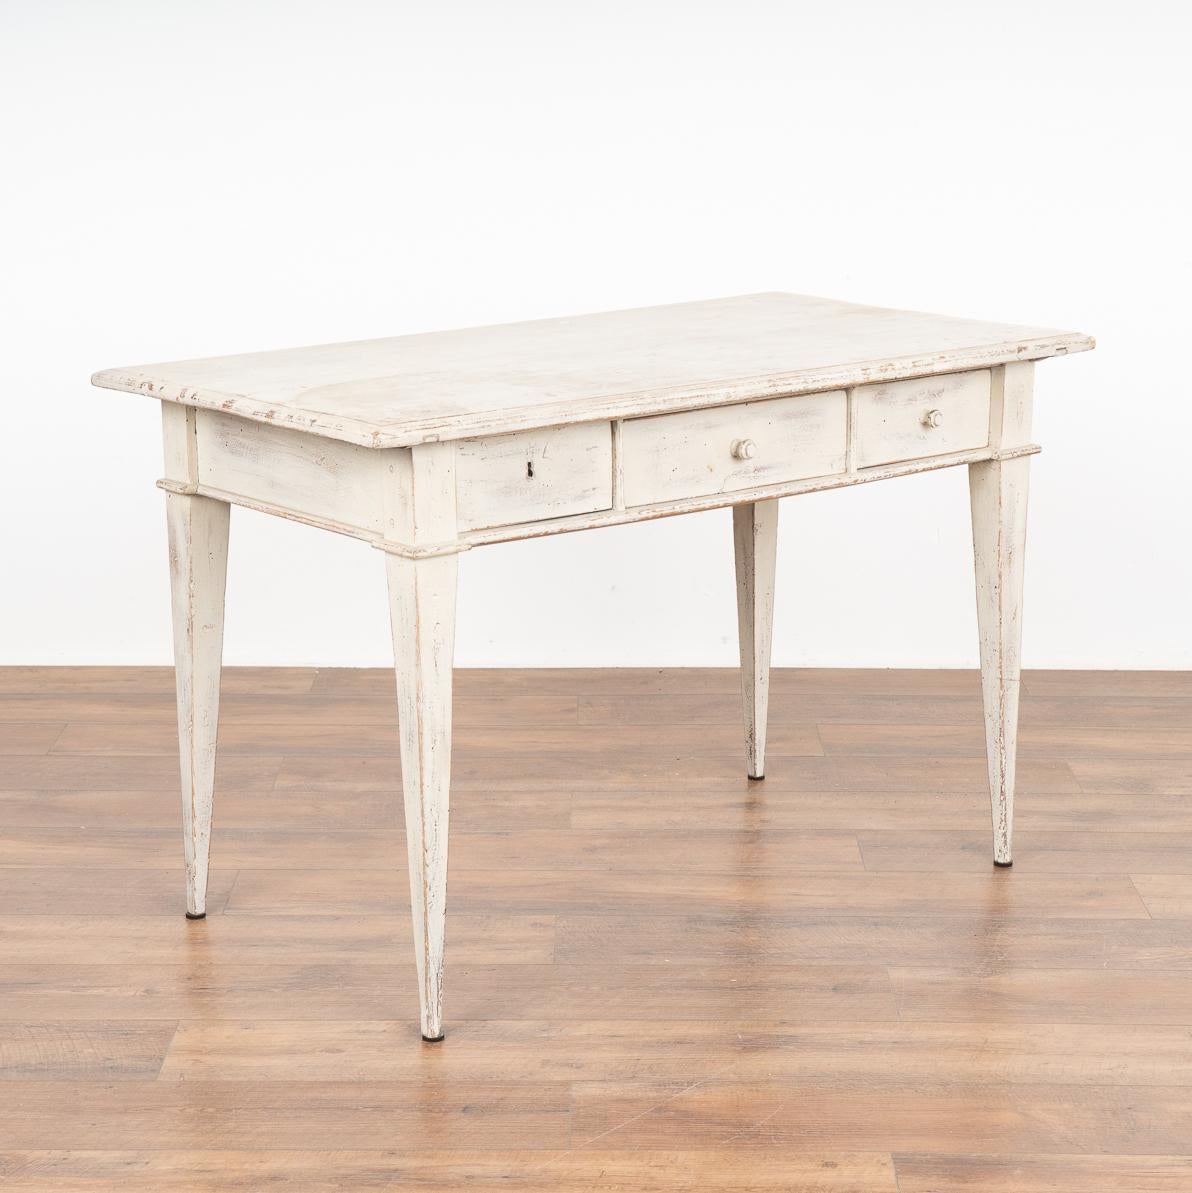 Swedish country pine side table with three drawers standing on four tapered legs; may also serve as an informal writing table or desk.
Drawers function; unique to this table is the center and right drawers have a wood pull, while the left drawer